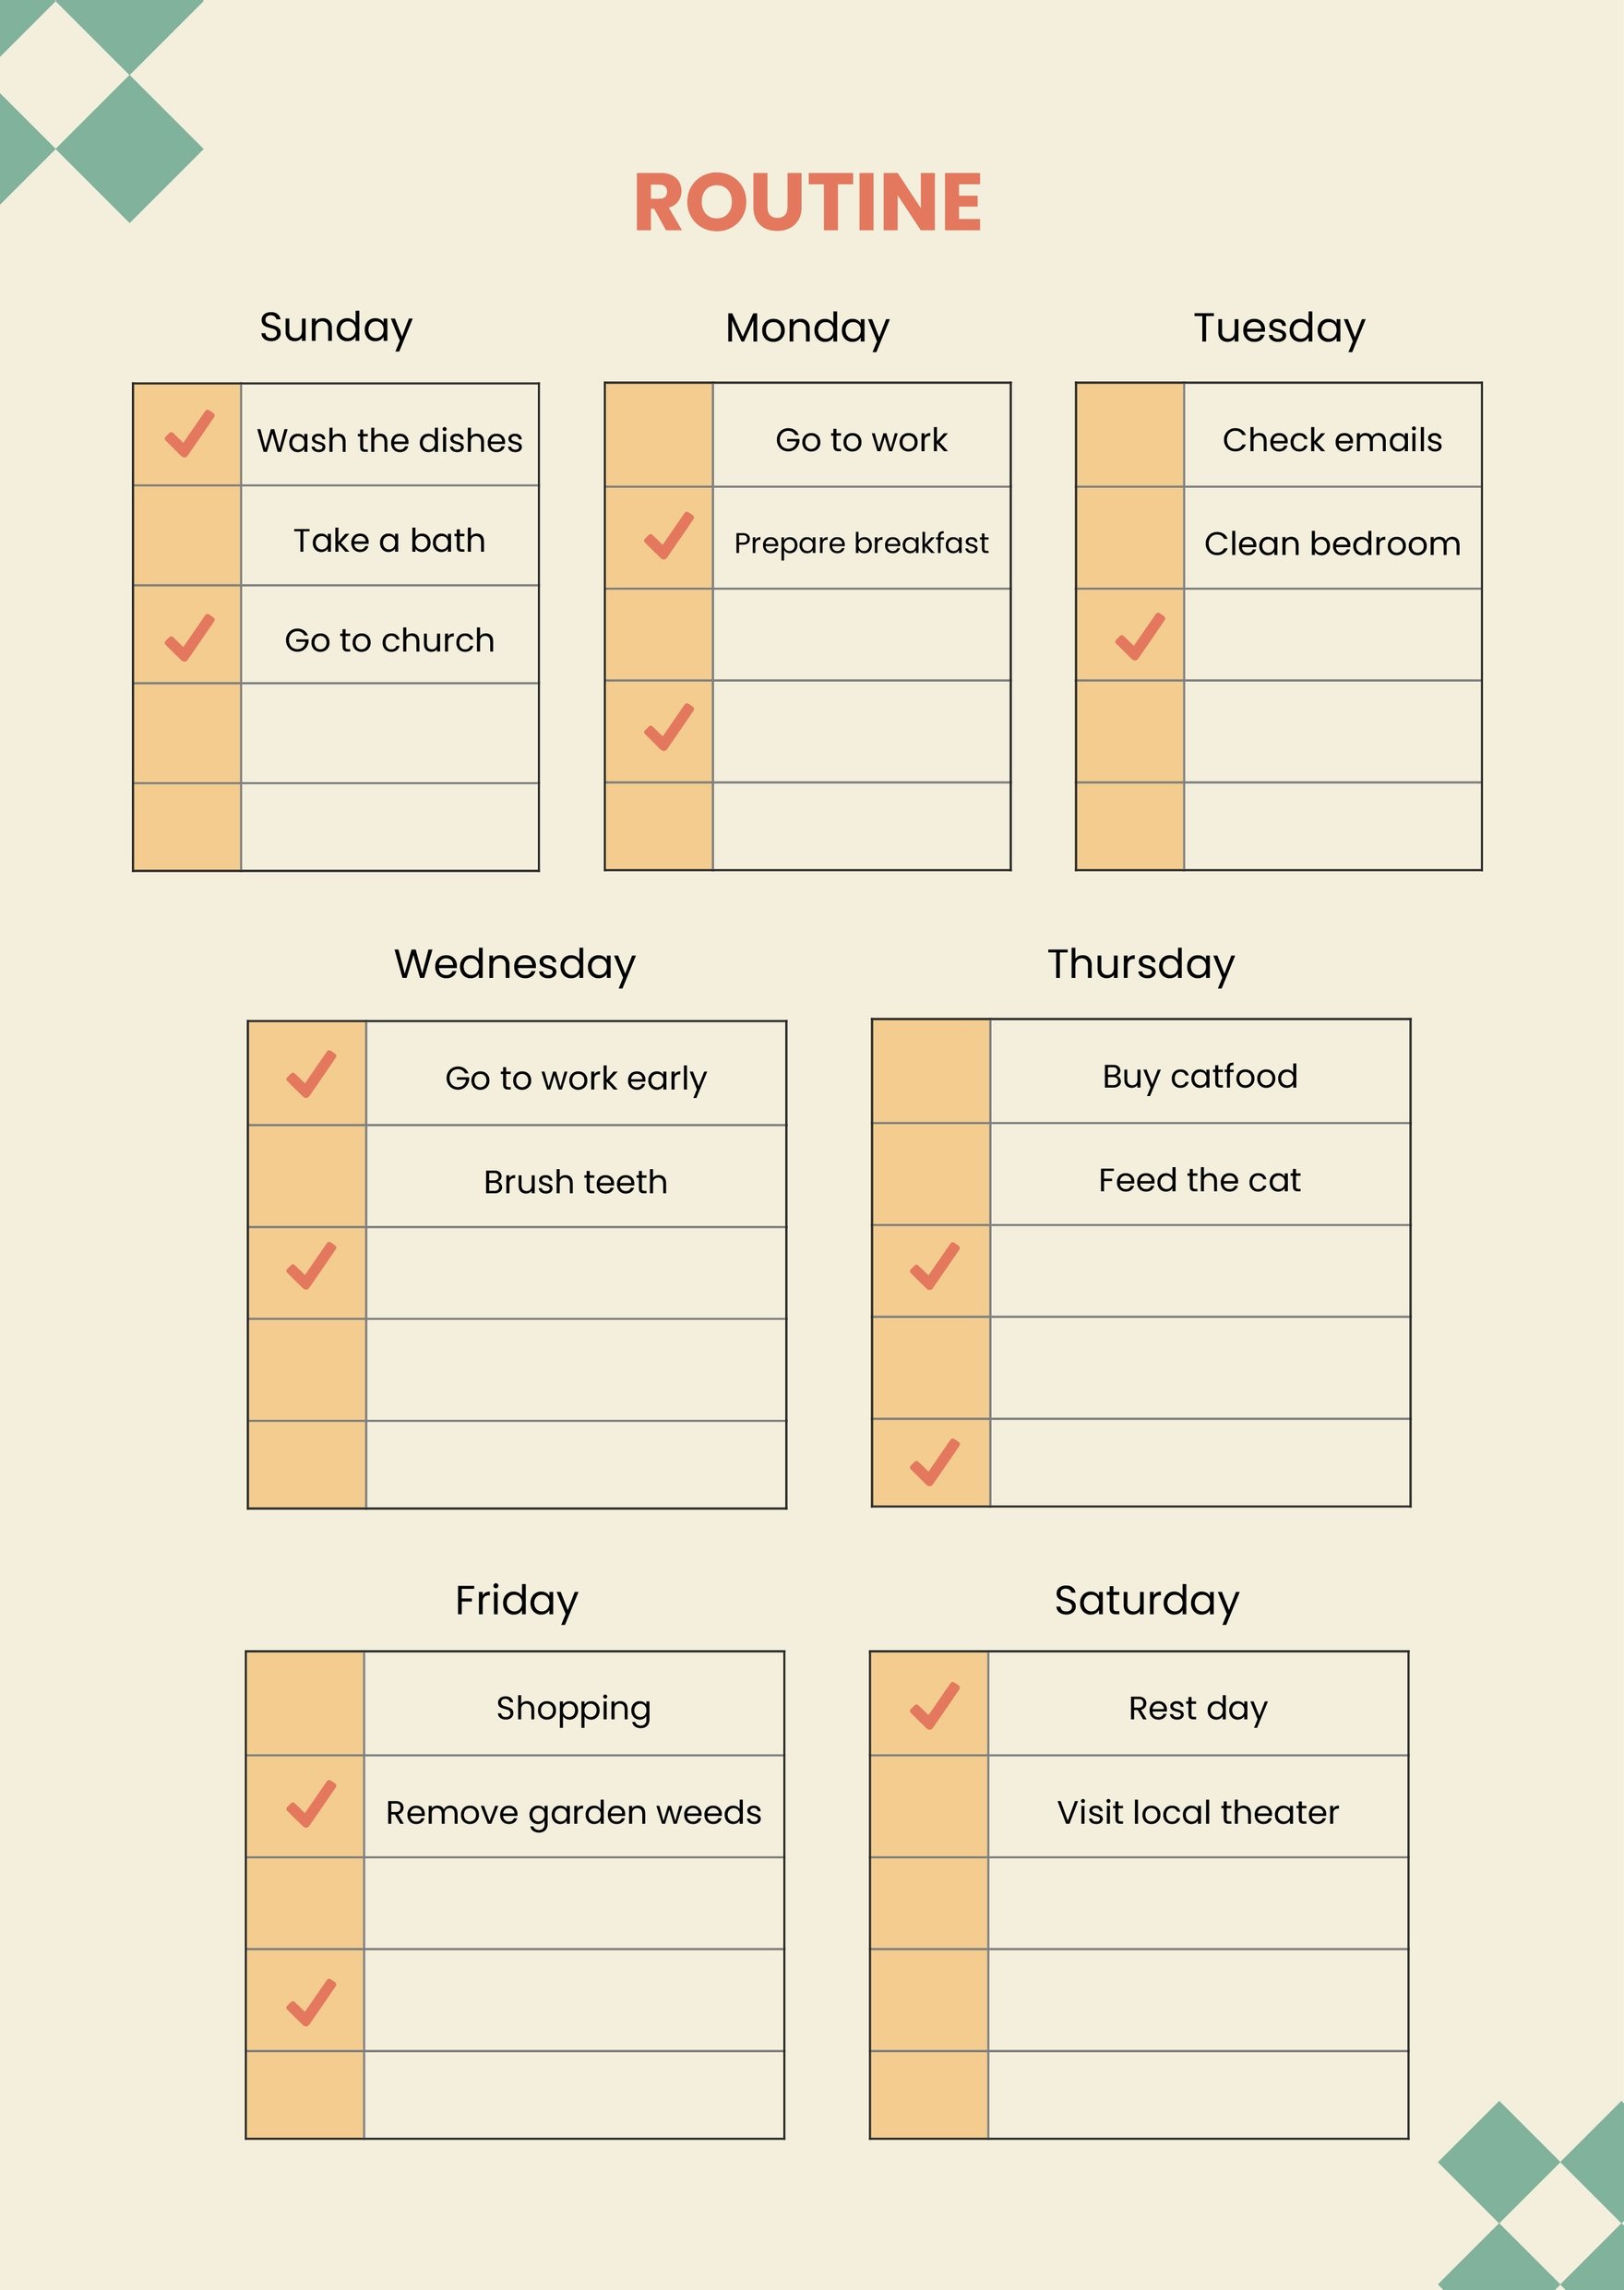 Personalized Routine Chart in PDF, Illustrator